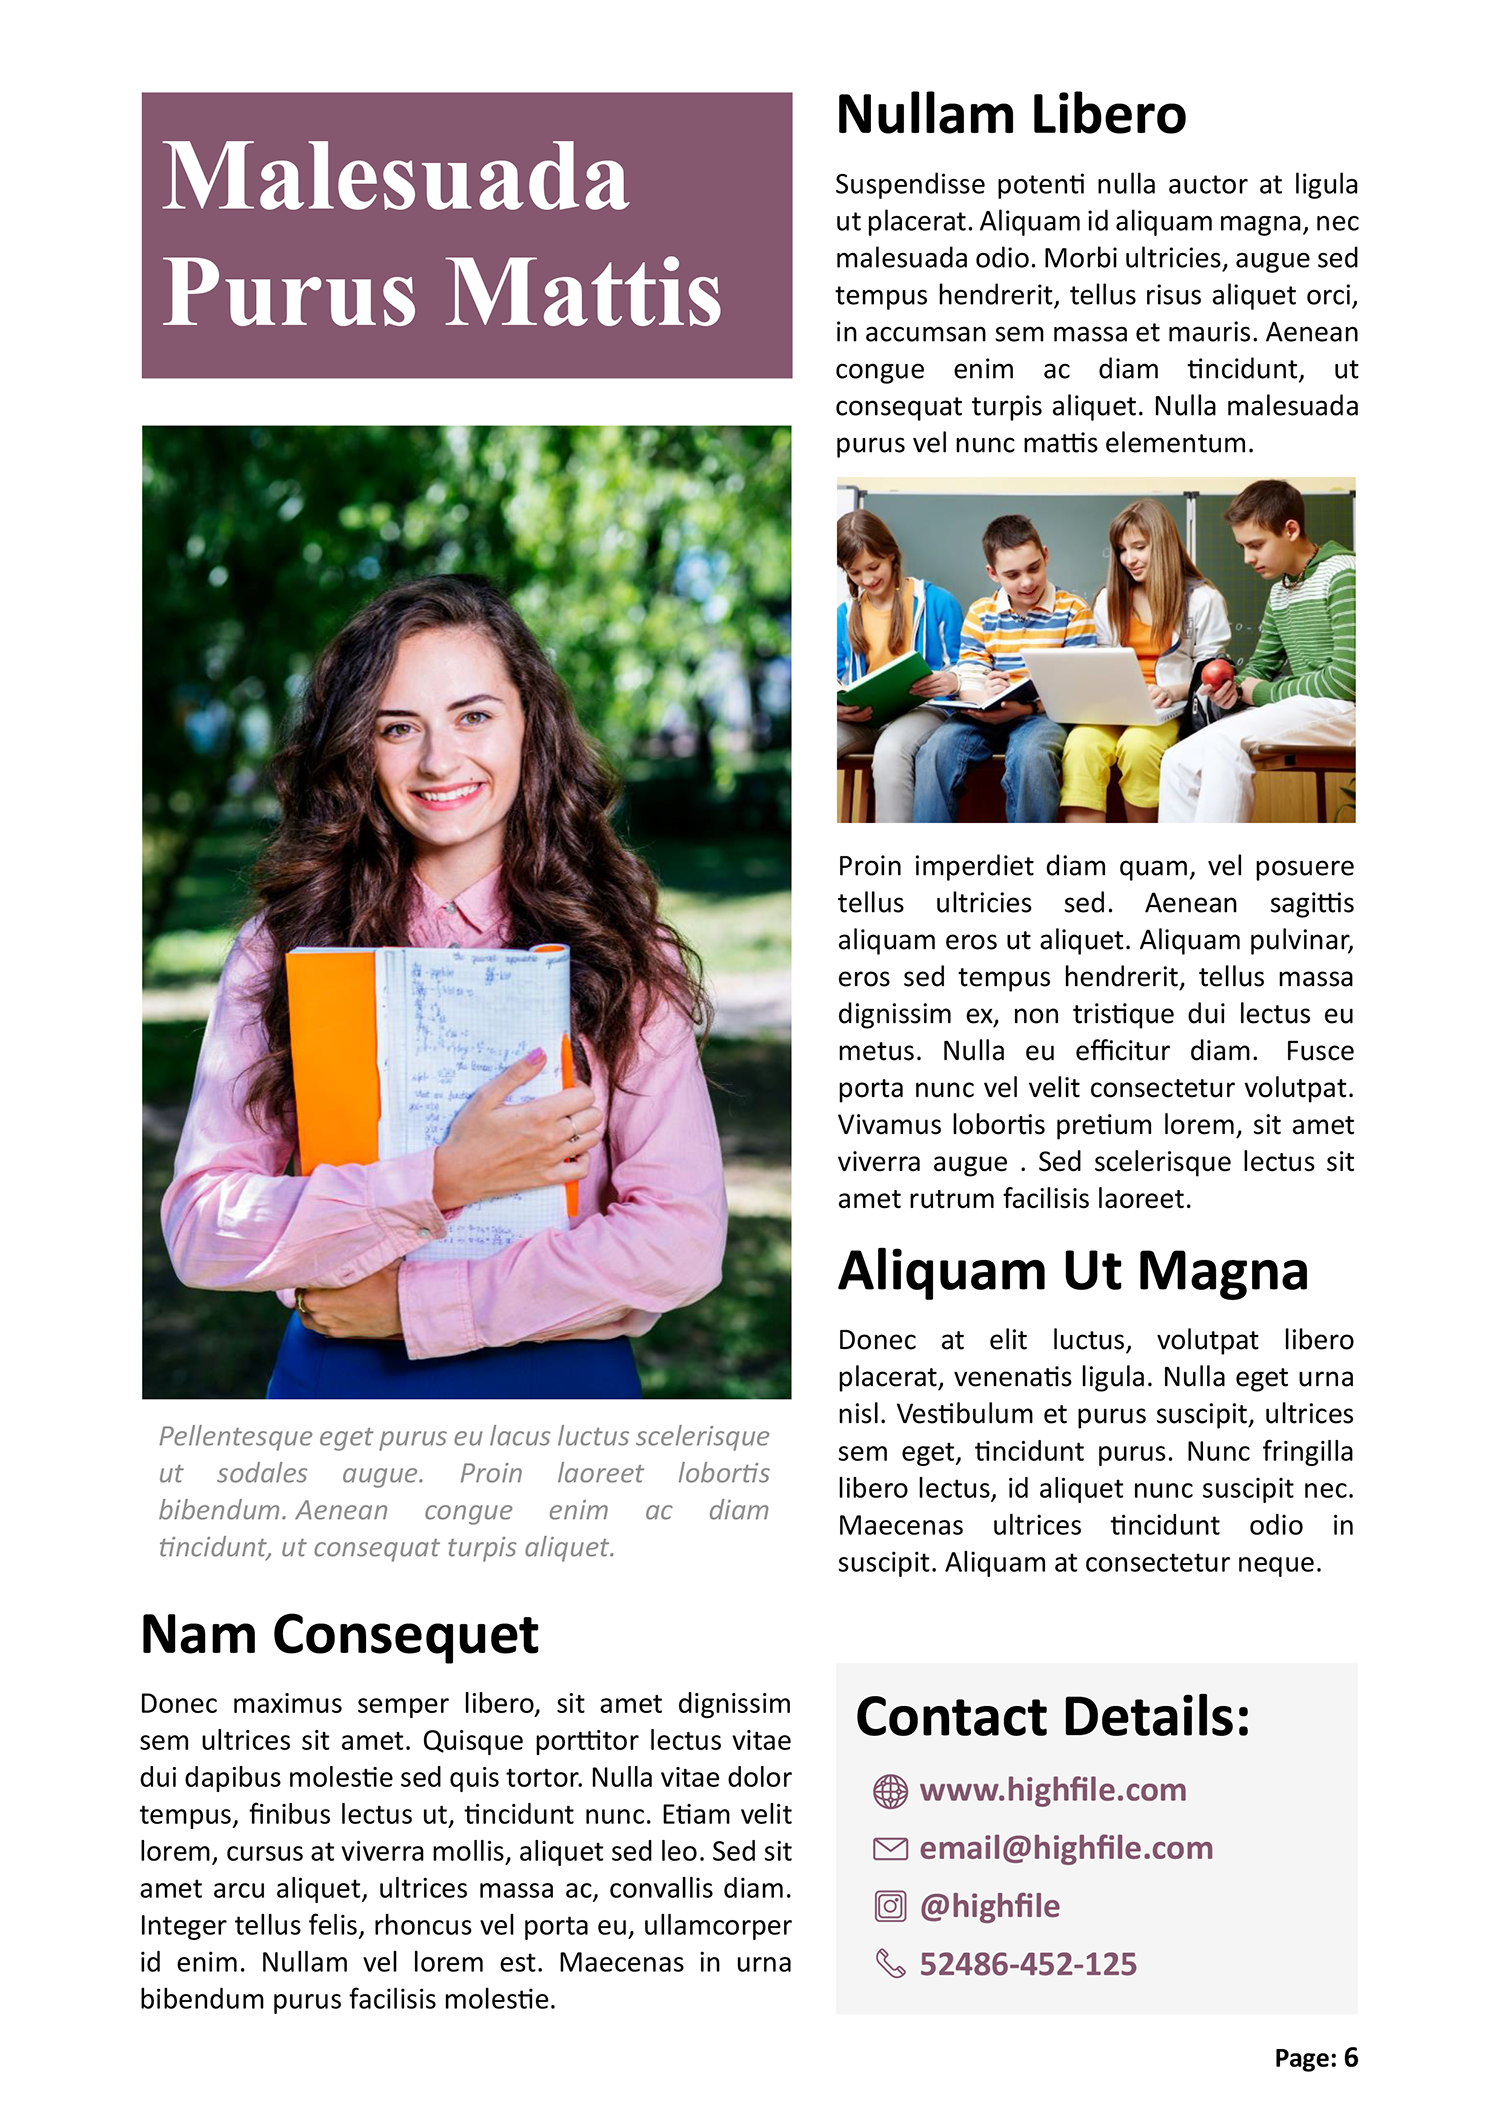 Newspaper Article Template for Elementary Students - Page 06